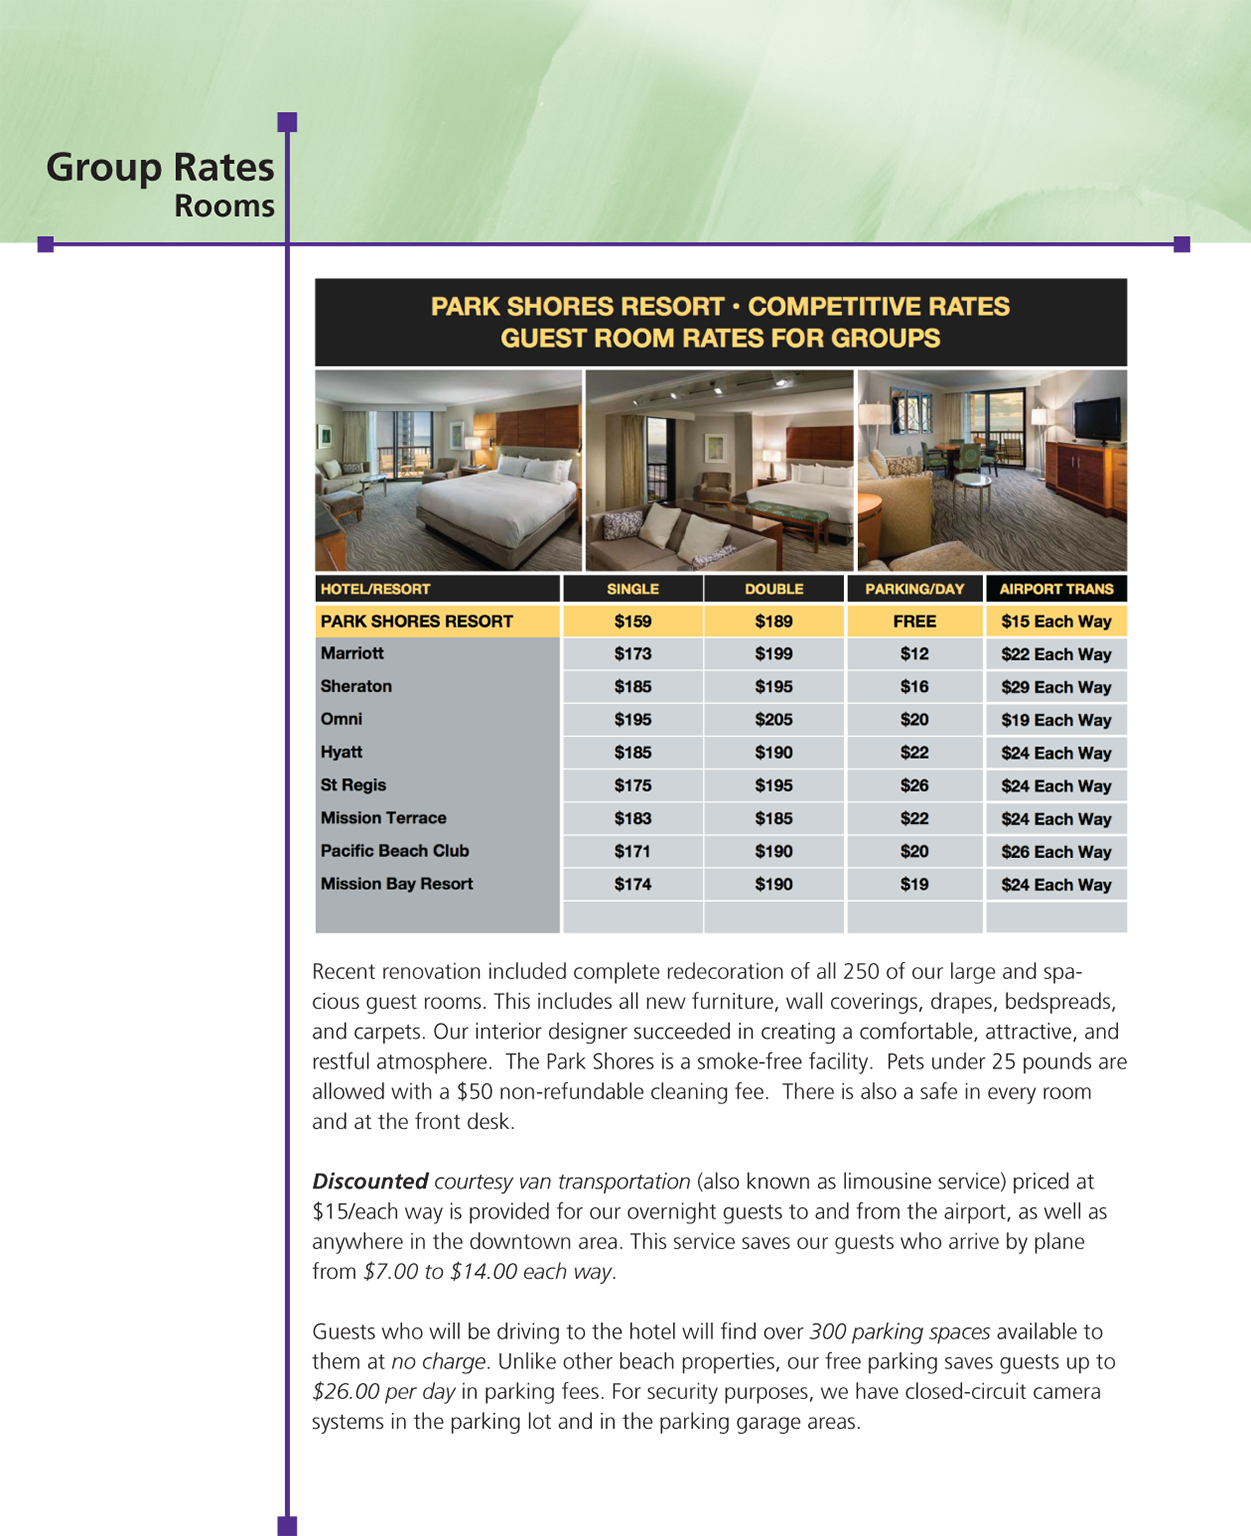 A page titled “Group rates; Rooms” shows competitive rates and guest room rates for groups.